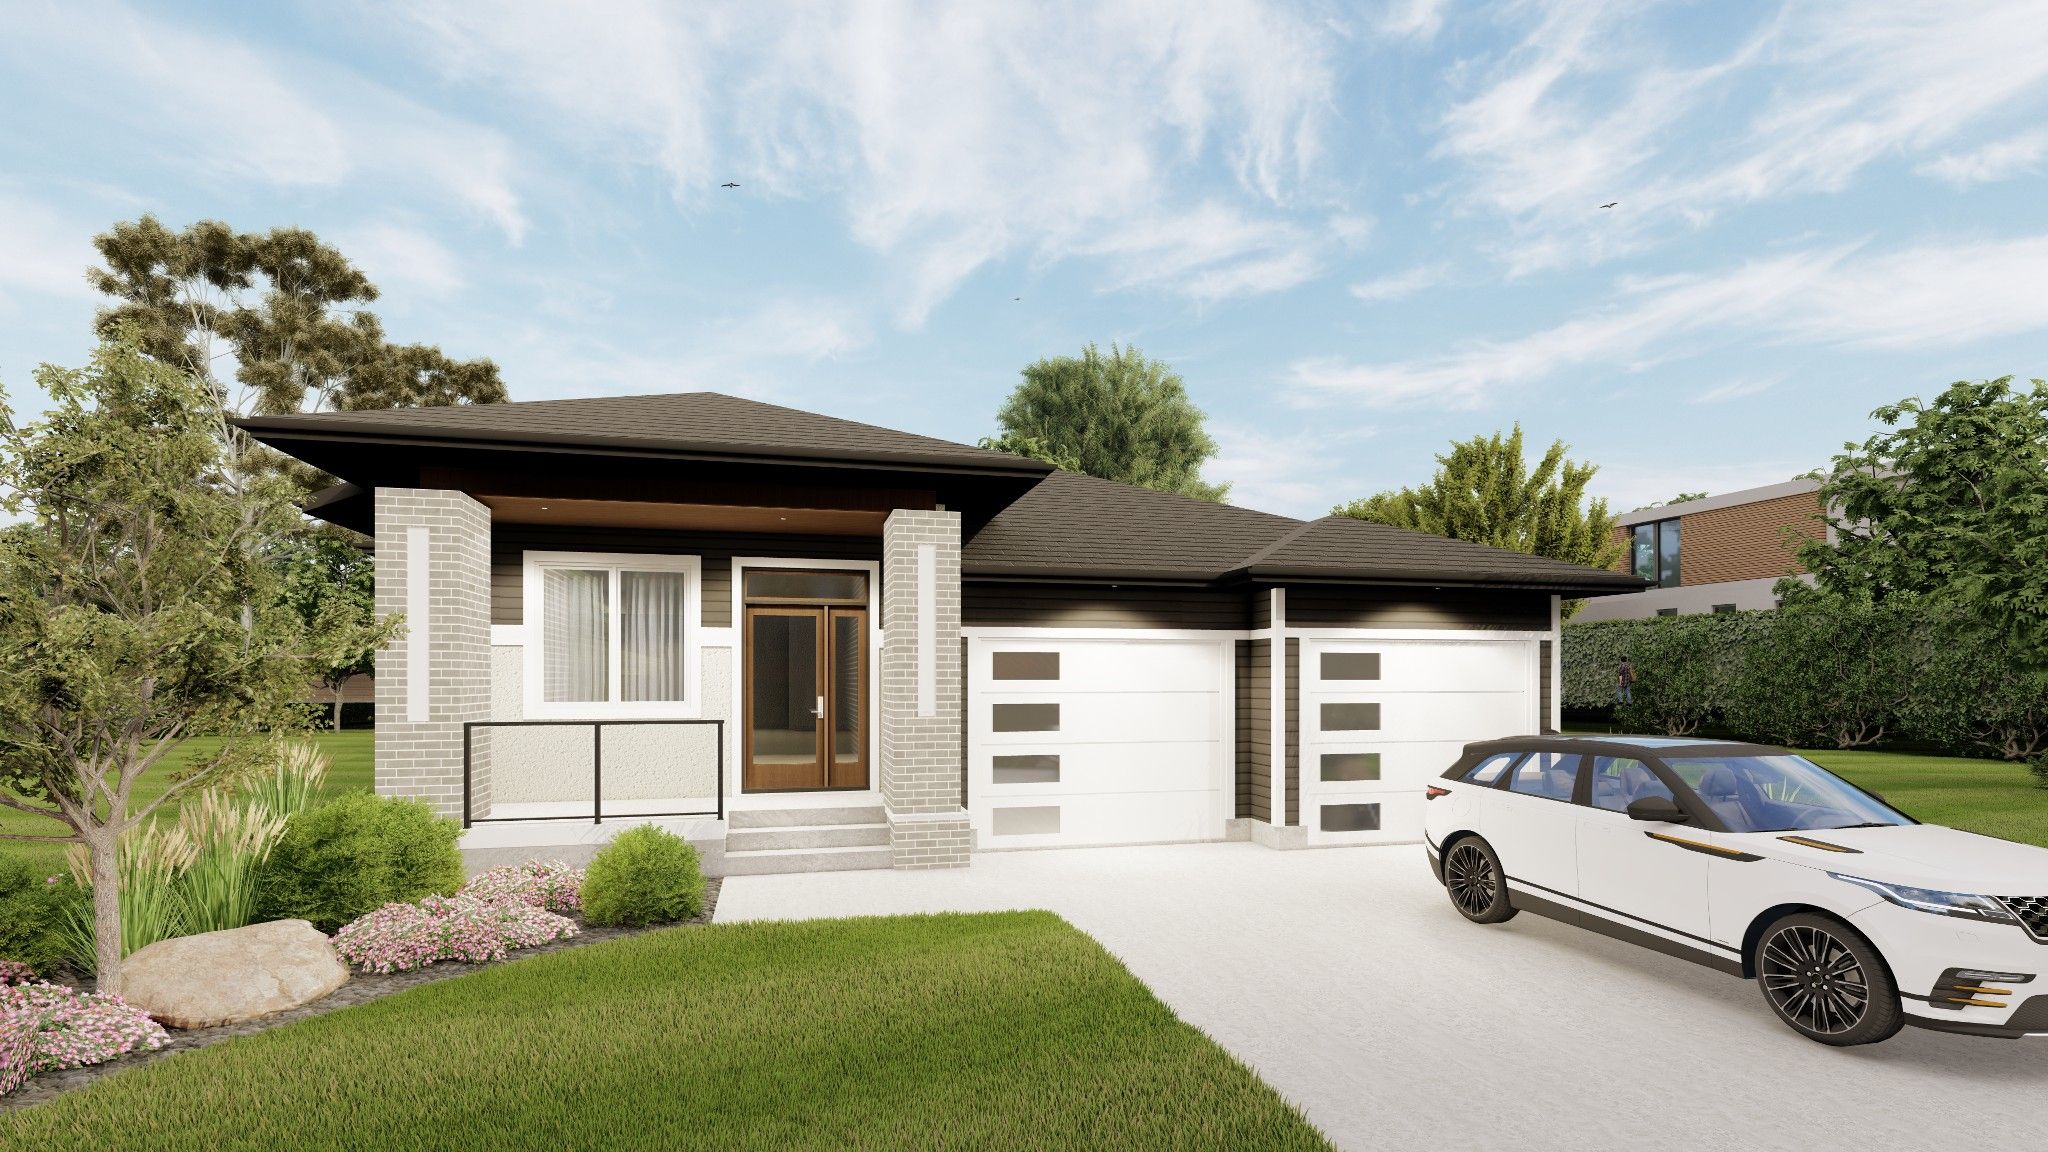 Main Photo: 30 Tanager Trail in Winnipeg: Sage Creek Single Family Detached for sale (2K) 